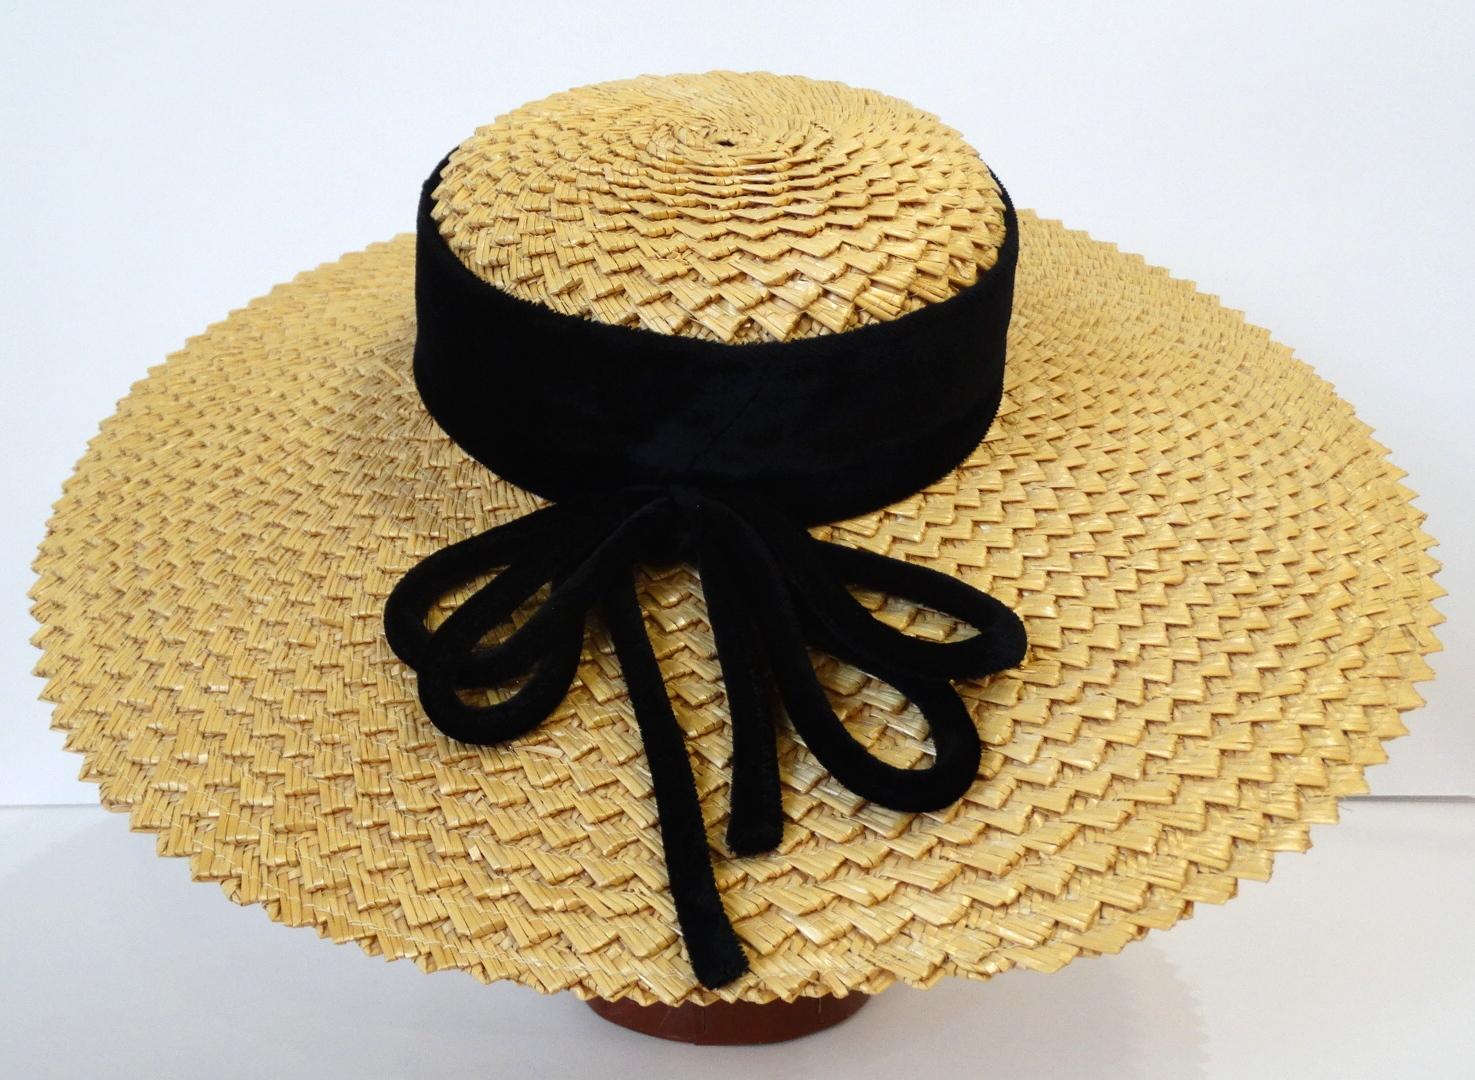 The most romantic little boater hat to satisfy all your Parisian dreams! Made of a classic woven yellow straw with a thick black band around the base of the rim. Playful multi-strand bow on the side. Pairs perfectly with all your favorite sundresses